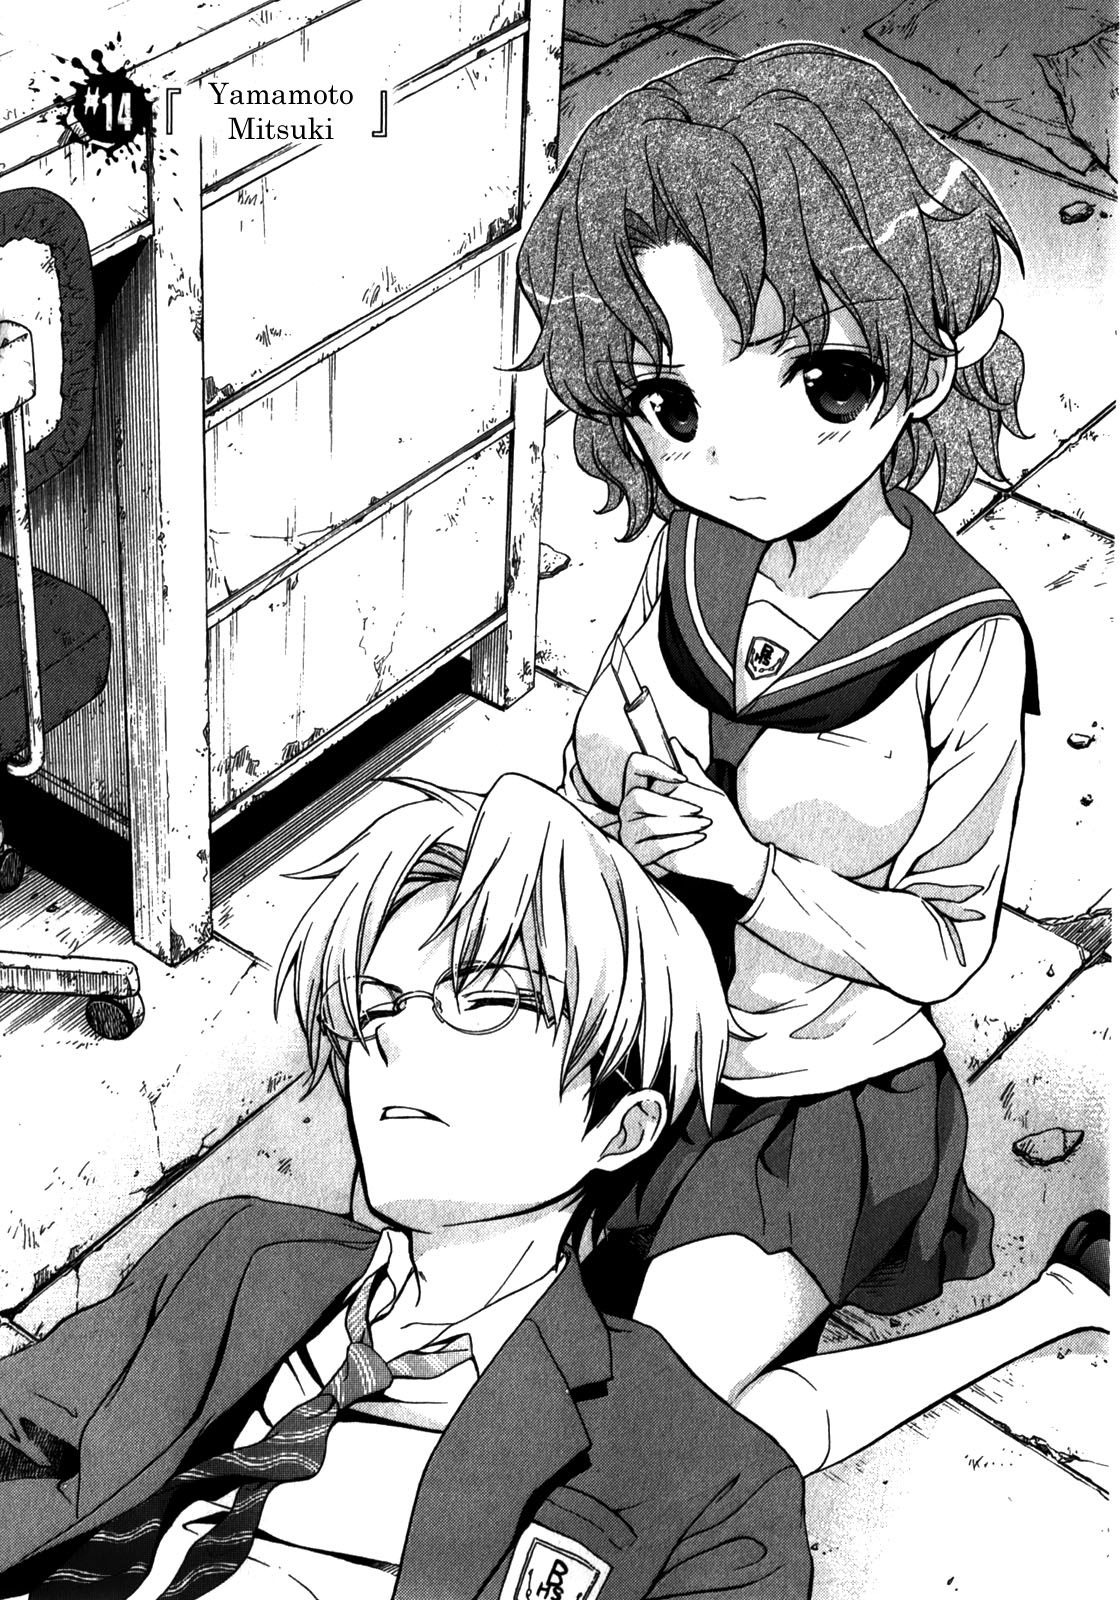 Corpse Party - Book of Shadows Vol.2 Ch.14